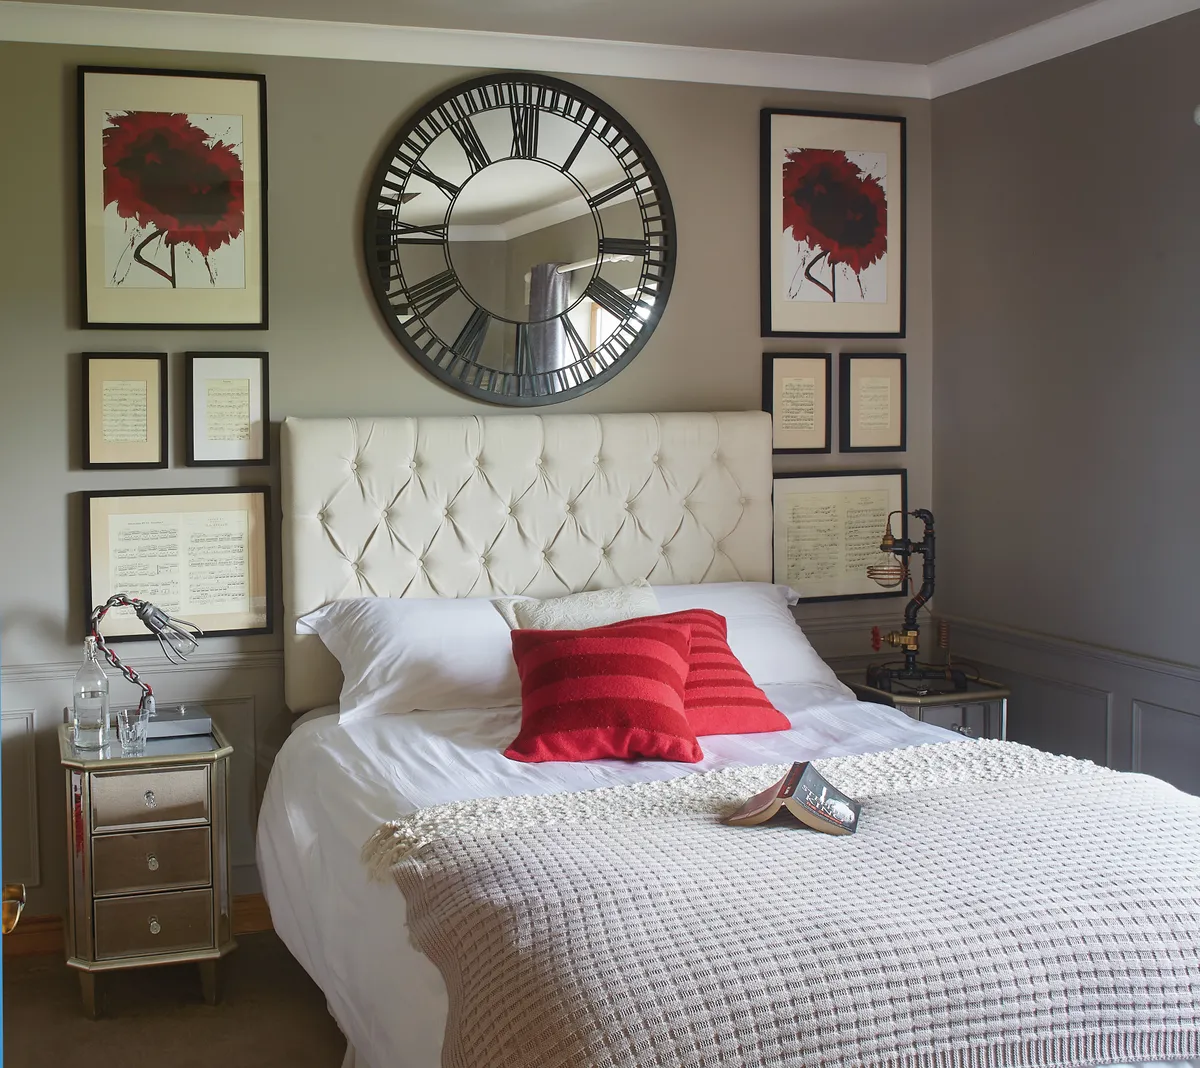 In the master bedroom, Shane made the bedside lamps and framed musical score around the bed. The mirror and the mirrored lockers are from Next, the walls are painted in Taupe from Colourtrend and the couple had the headboard made. The red cushions are from Avoca